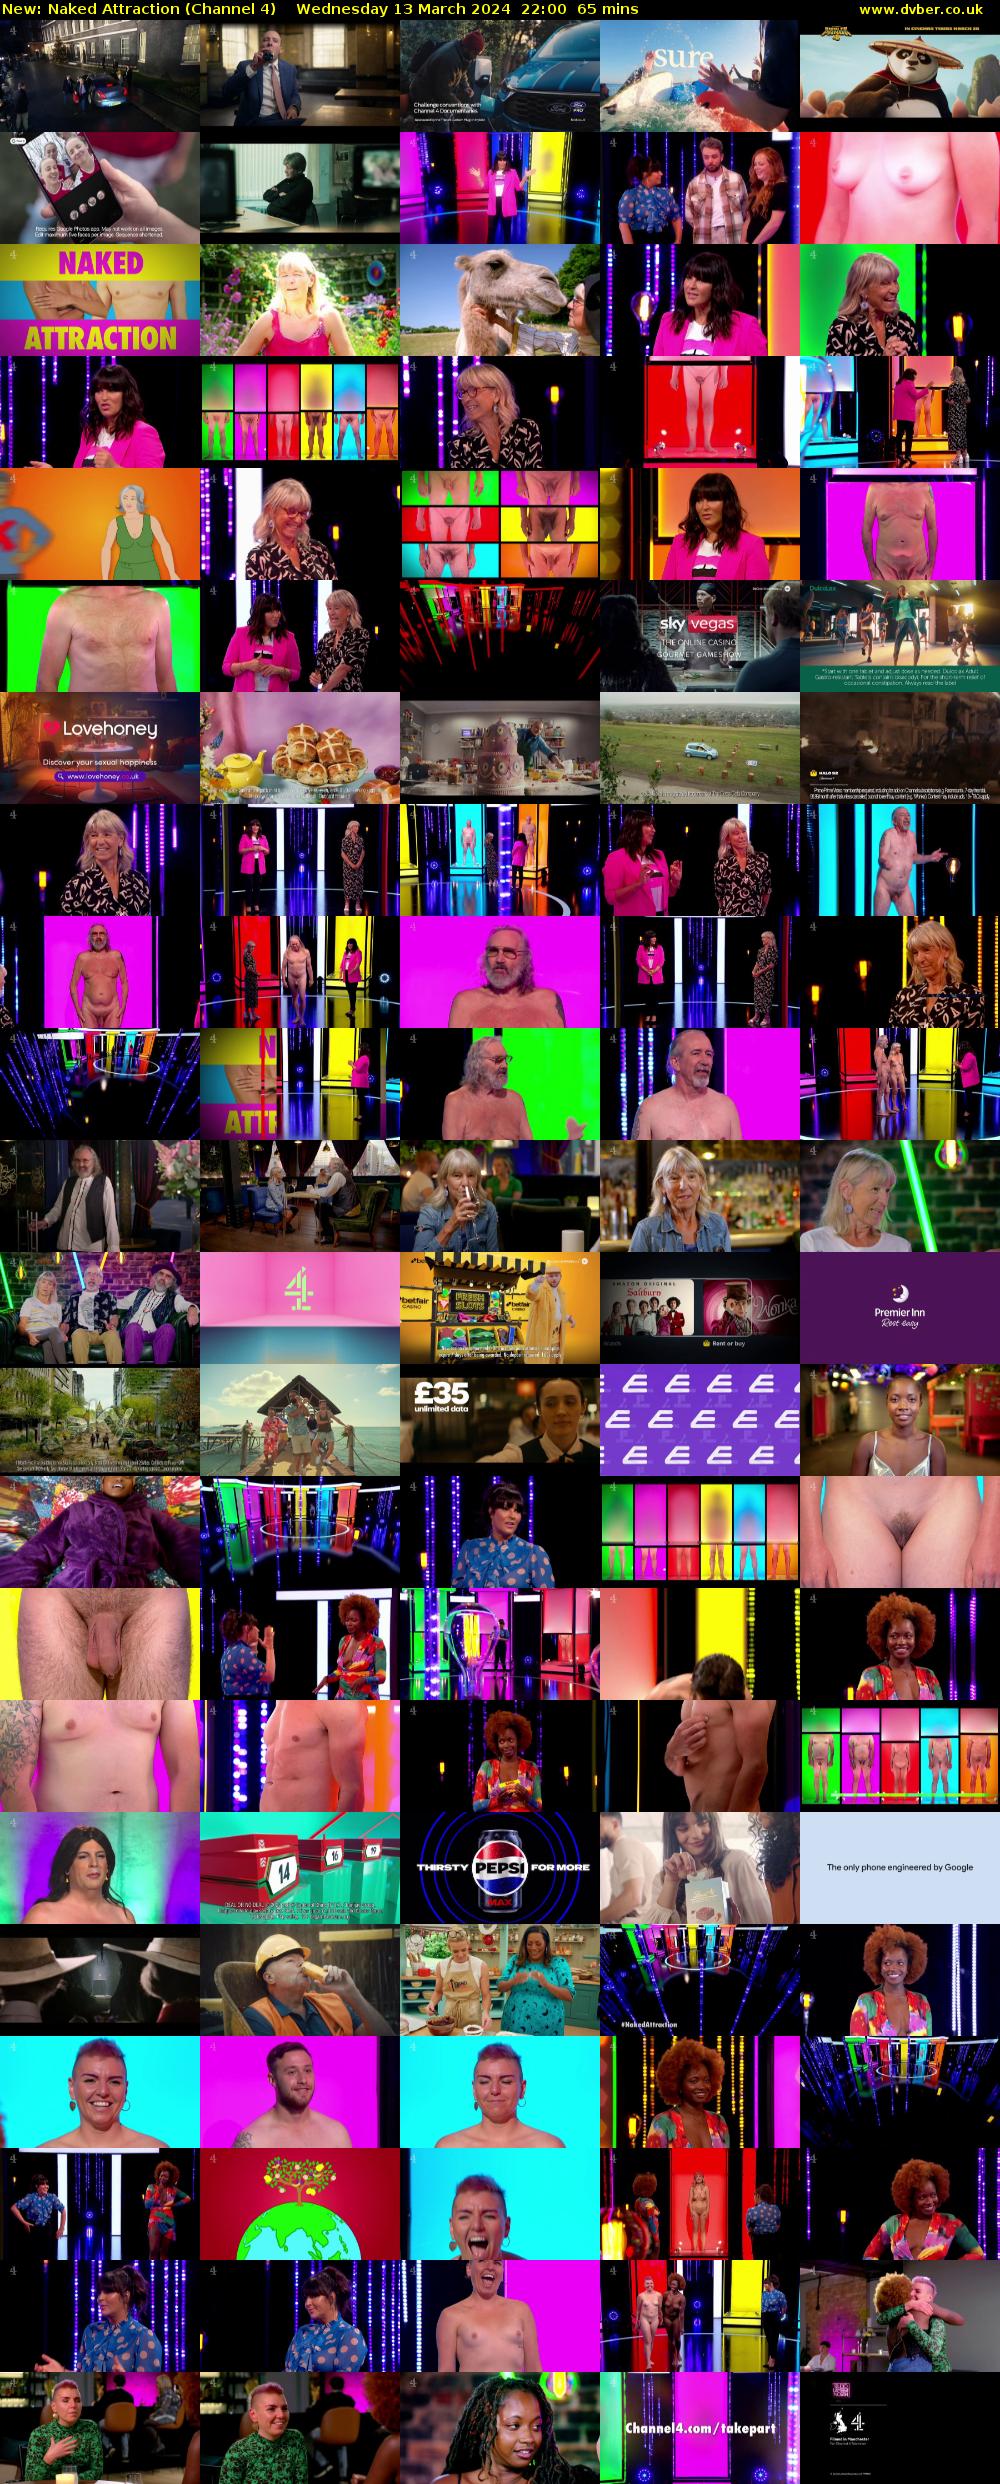 Naked Attraction (Channel 4) Wednesday 13 March 2024 22:00 - 23:05